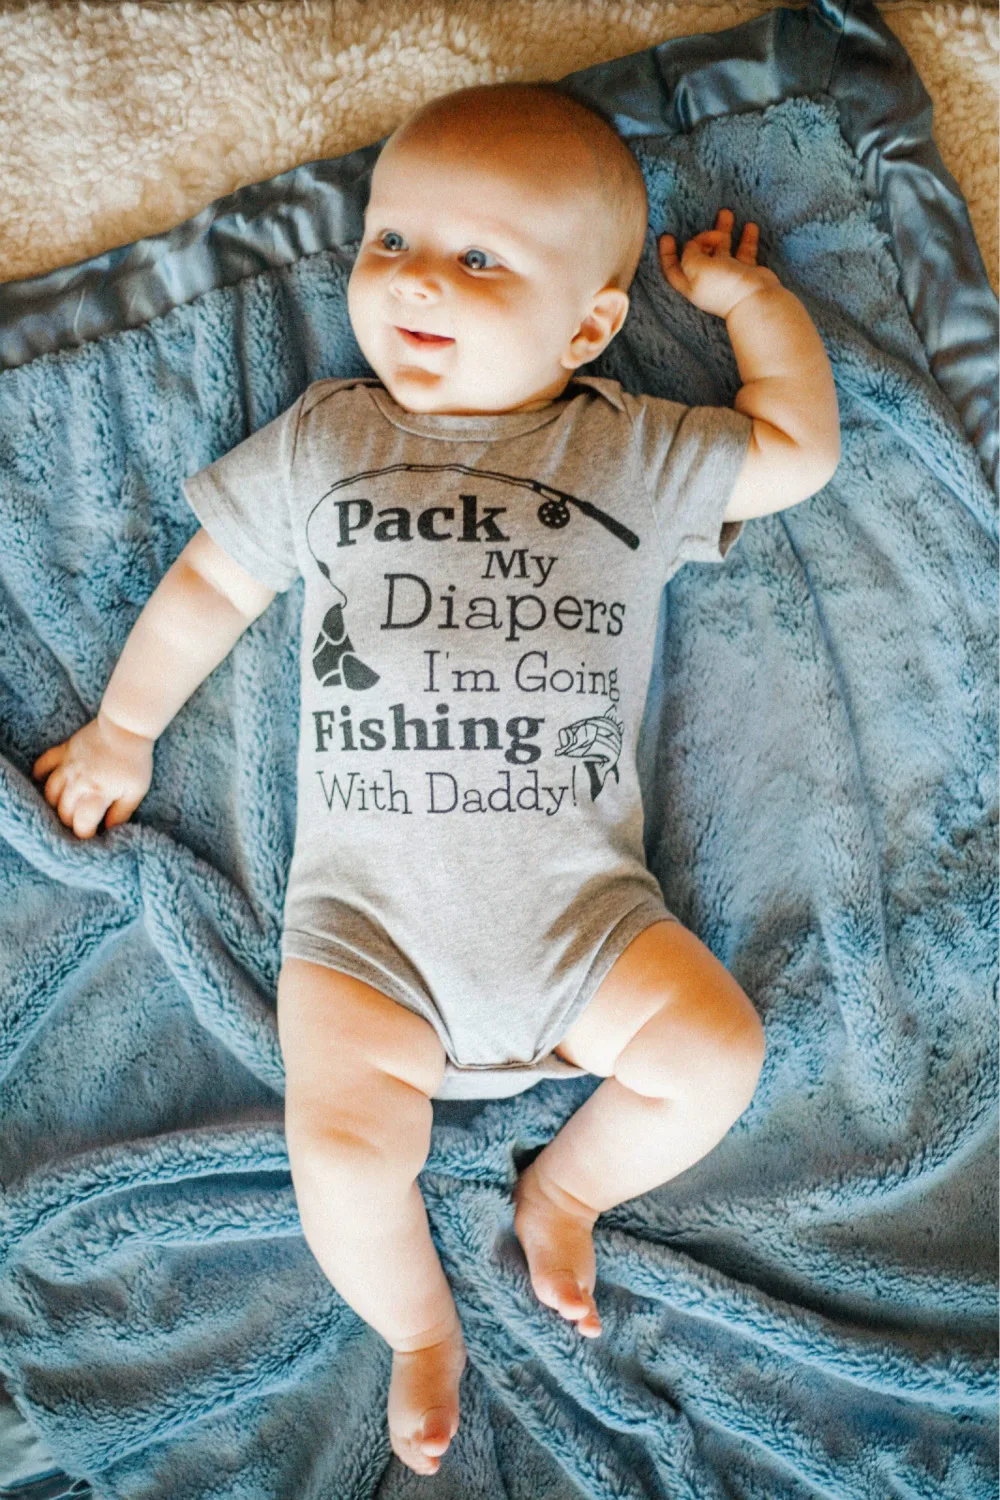 

I Am Going Fishing with Daddy Letter Printed Newborn Baby Girl Short SleeveRomper Toddler Jumpsuit Outfits